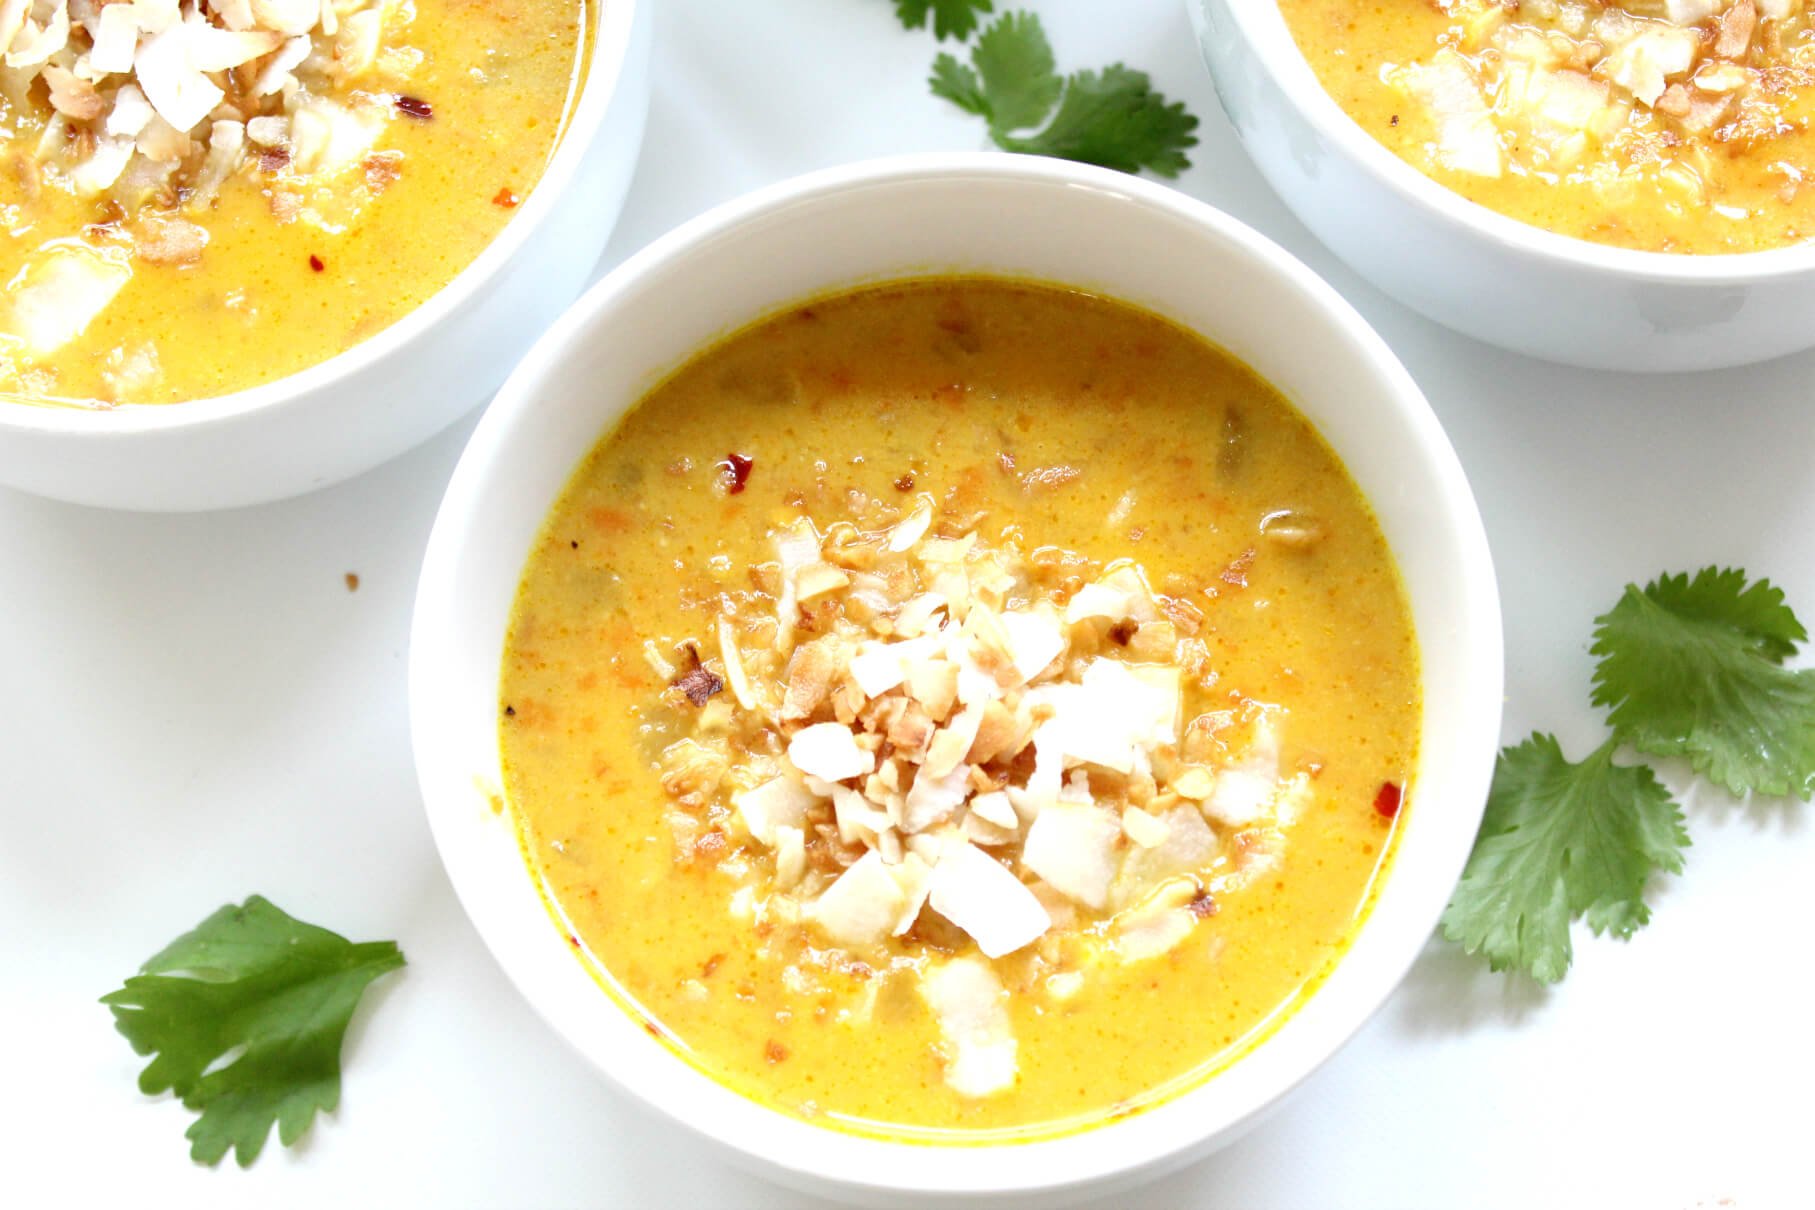 Golden Lentil Soup with Turmeric and Coconut (Grain-Free, Dairy-Free)